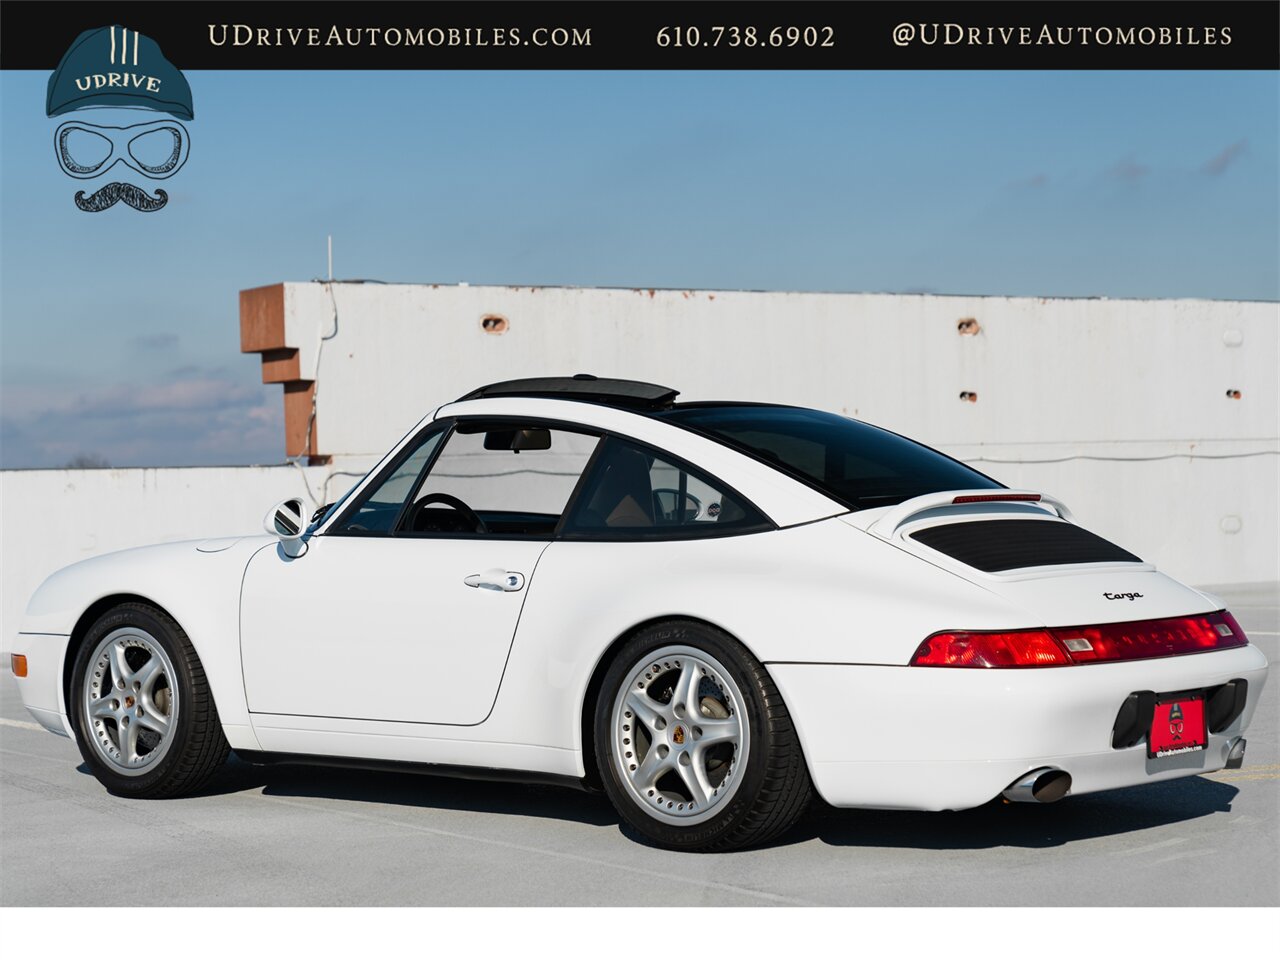 1998 Porsche 911 Carrera 993 Targa  1 of 122 Produced 6 Speed $10k Recent Service Engine Reseal - Photo 24 - West Chester, PA 19382